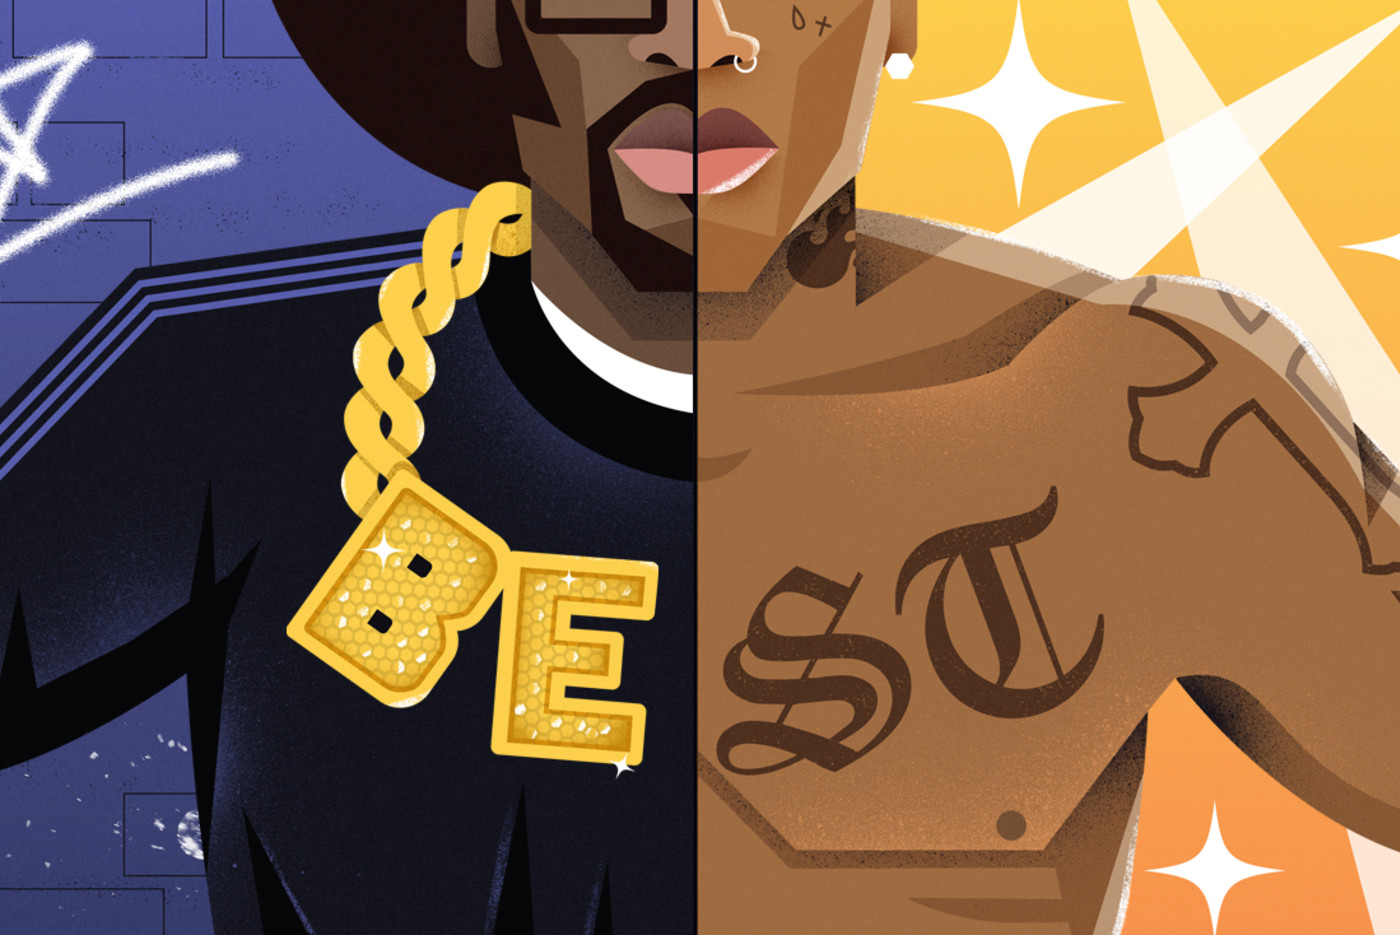 Pictures Of Famous Rappers Wallpapers